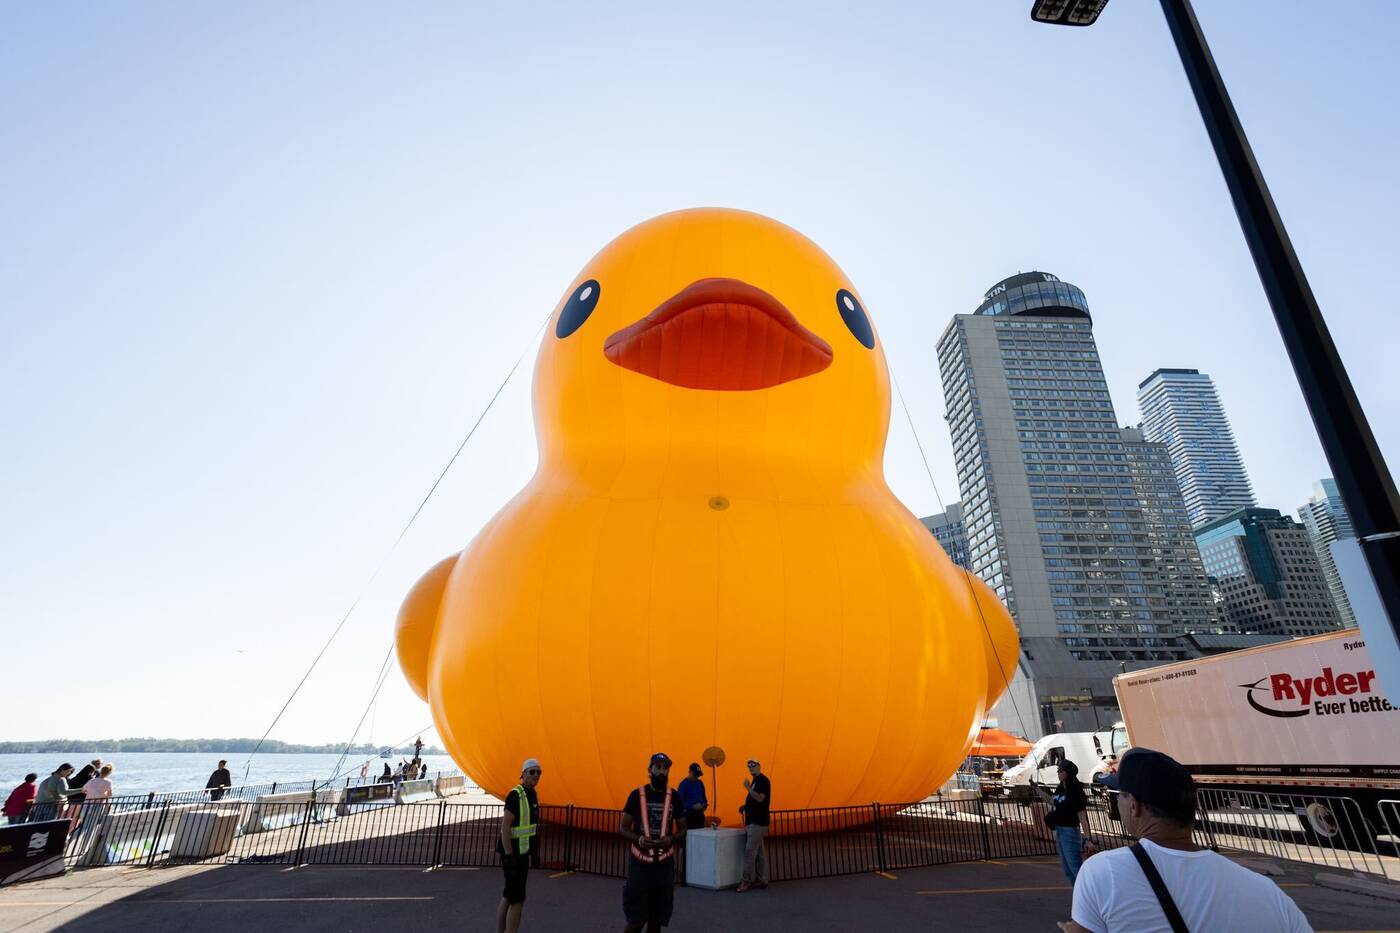 World's largest rubber duck set to visit the Overland Park